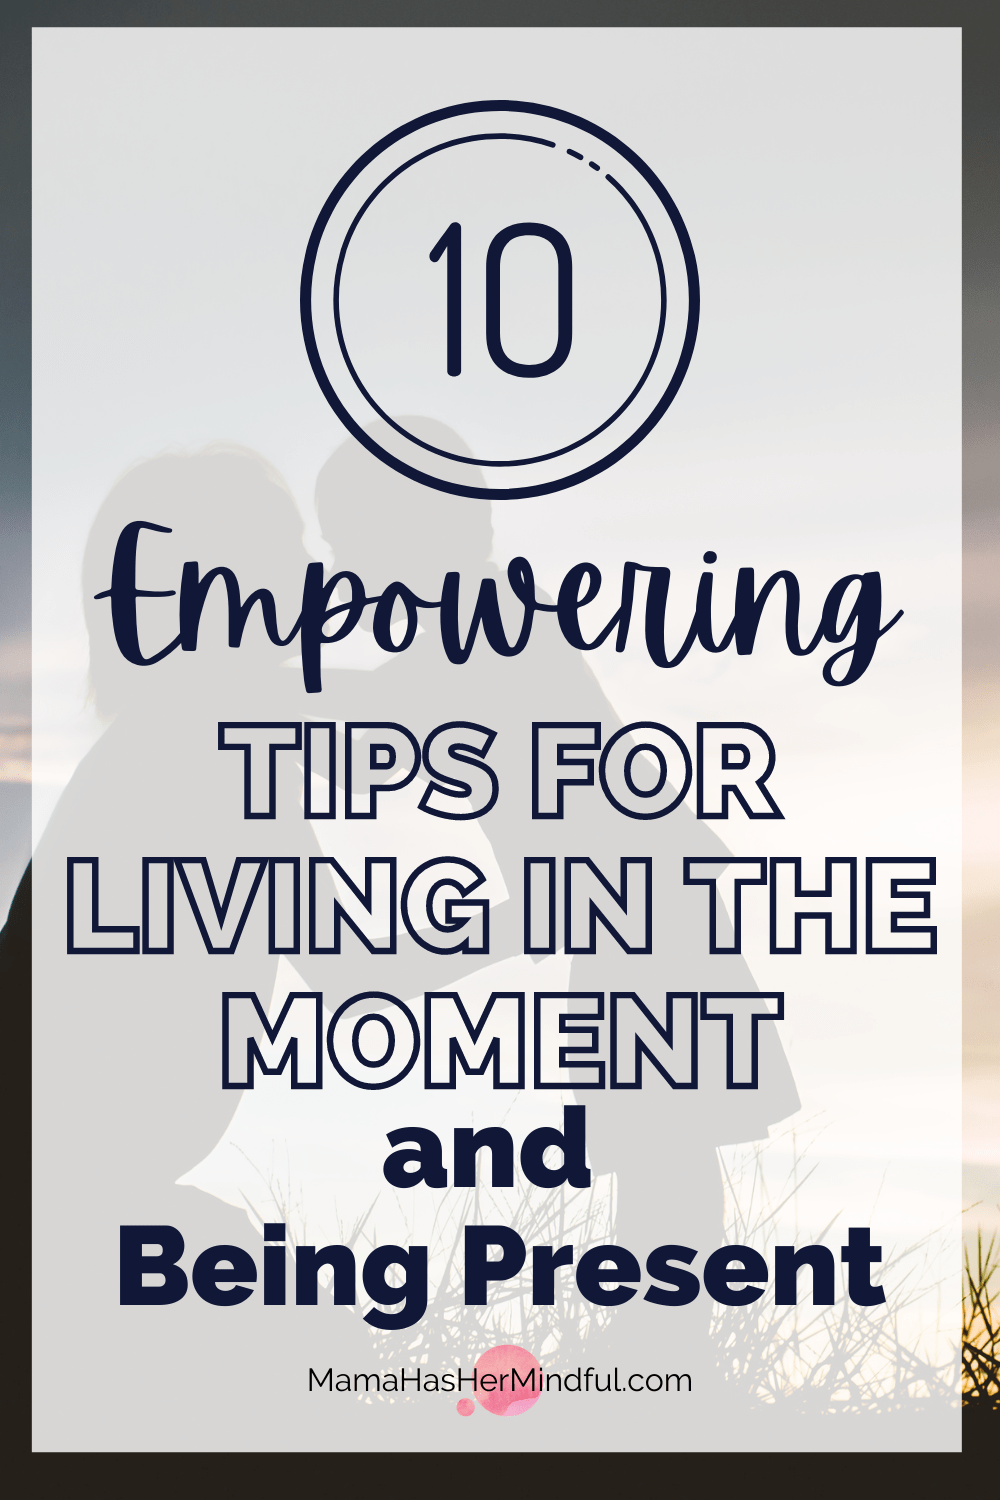 10 Uplifting Tips for Living in the Moment and Being Present